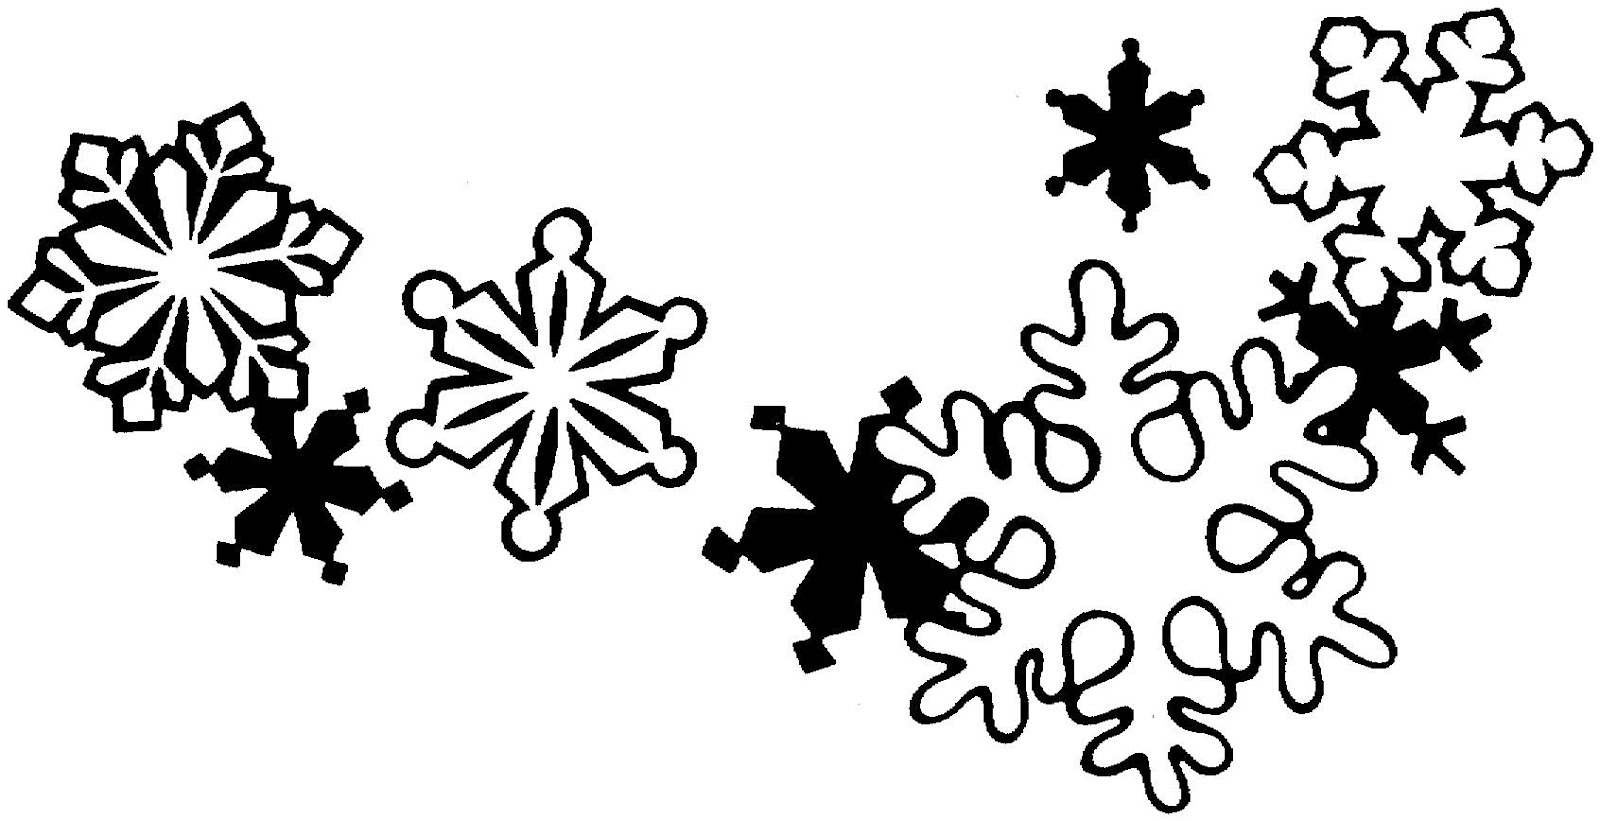 19 Black And White Christmas Borders Free Cliparts That You Can